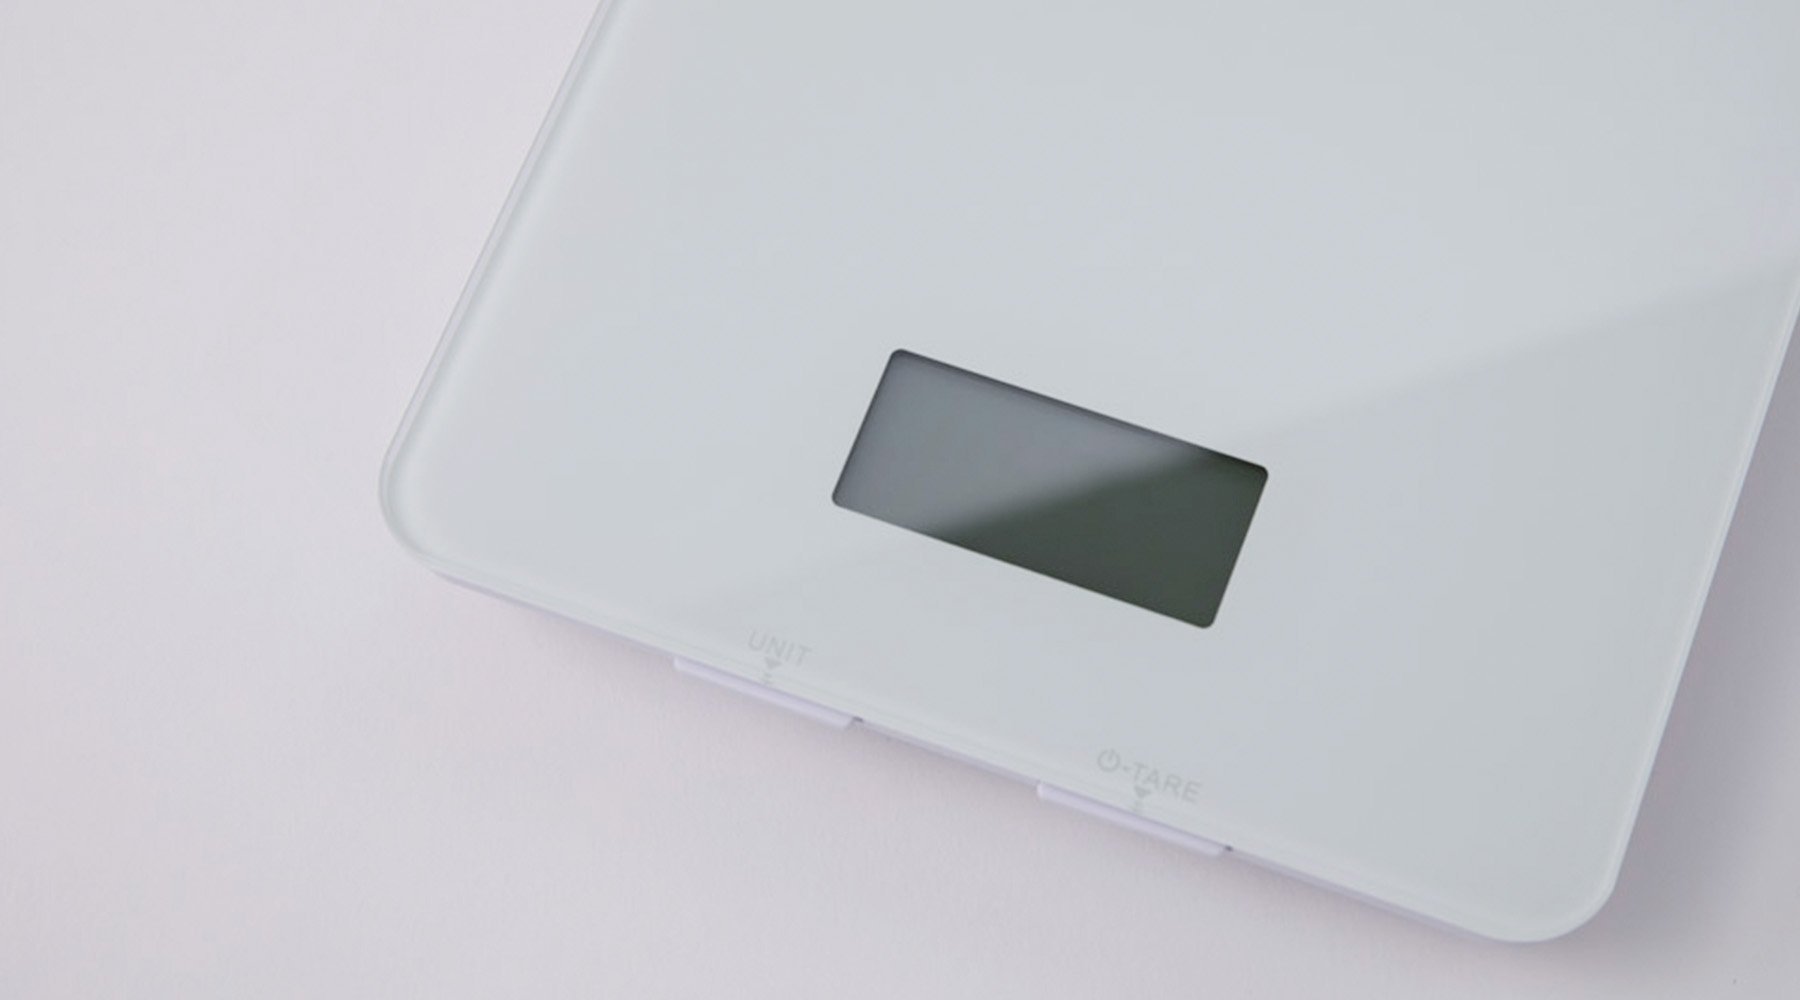 10 REASONS WHY YOU SHOULD OWN A DIGITAL FOOD SCALE